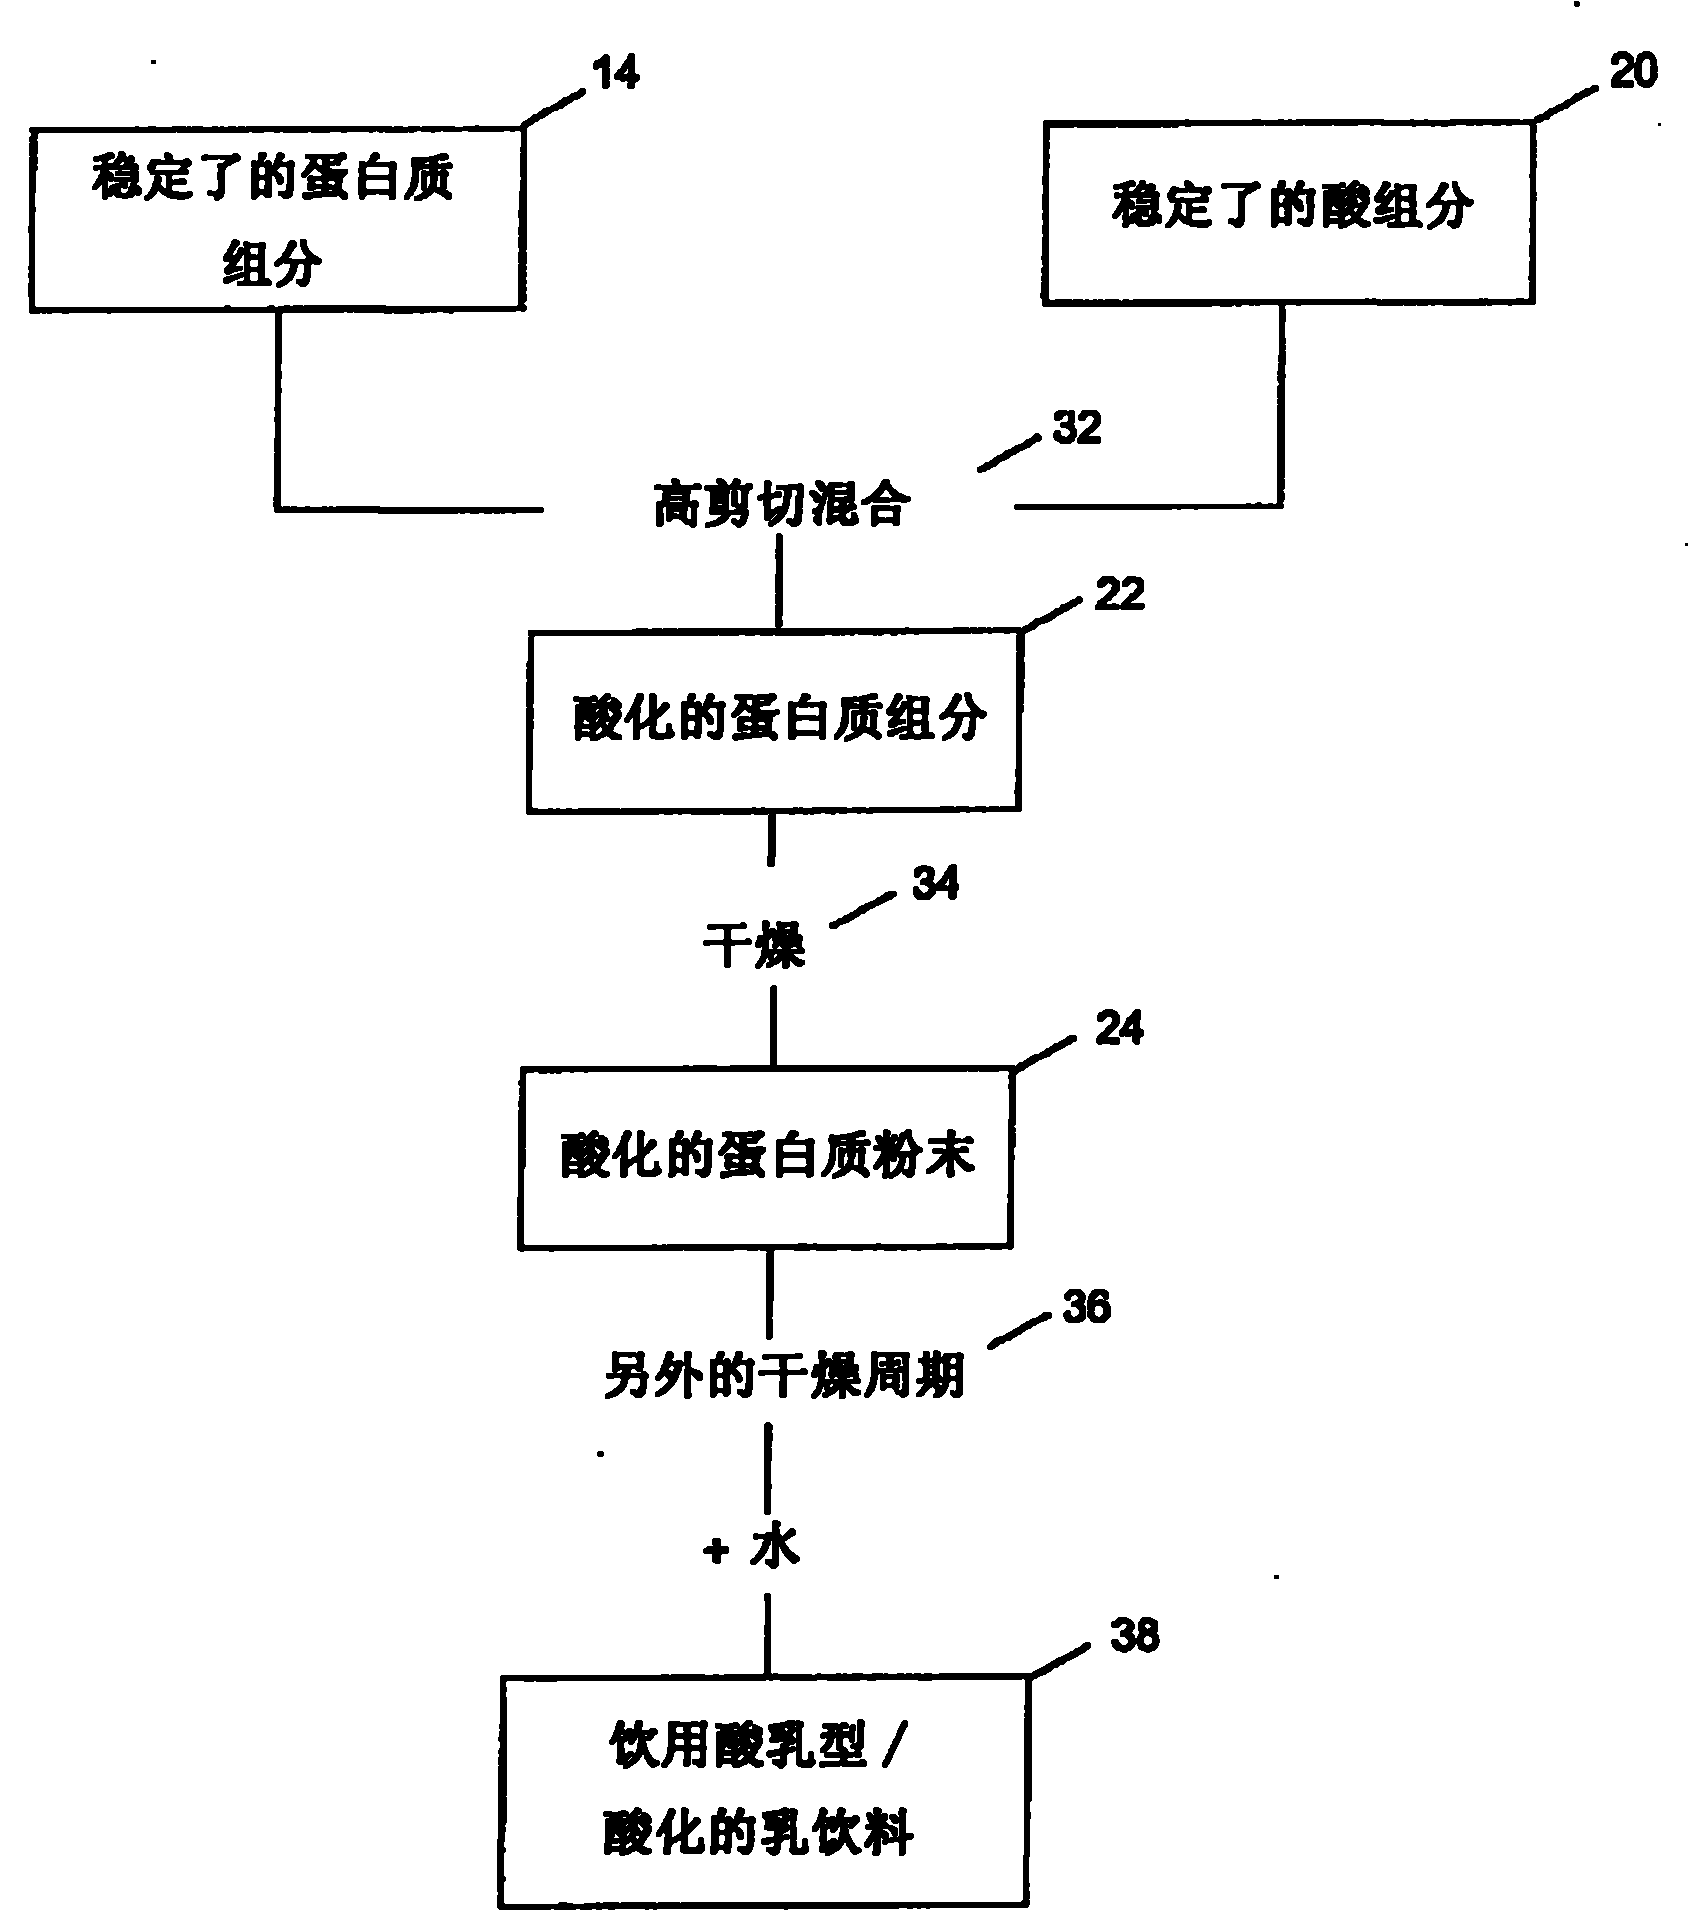 Method of producing acid stable protein products and products so produced